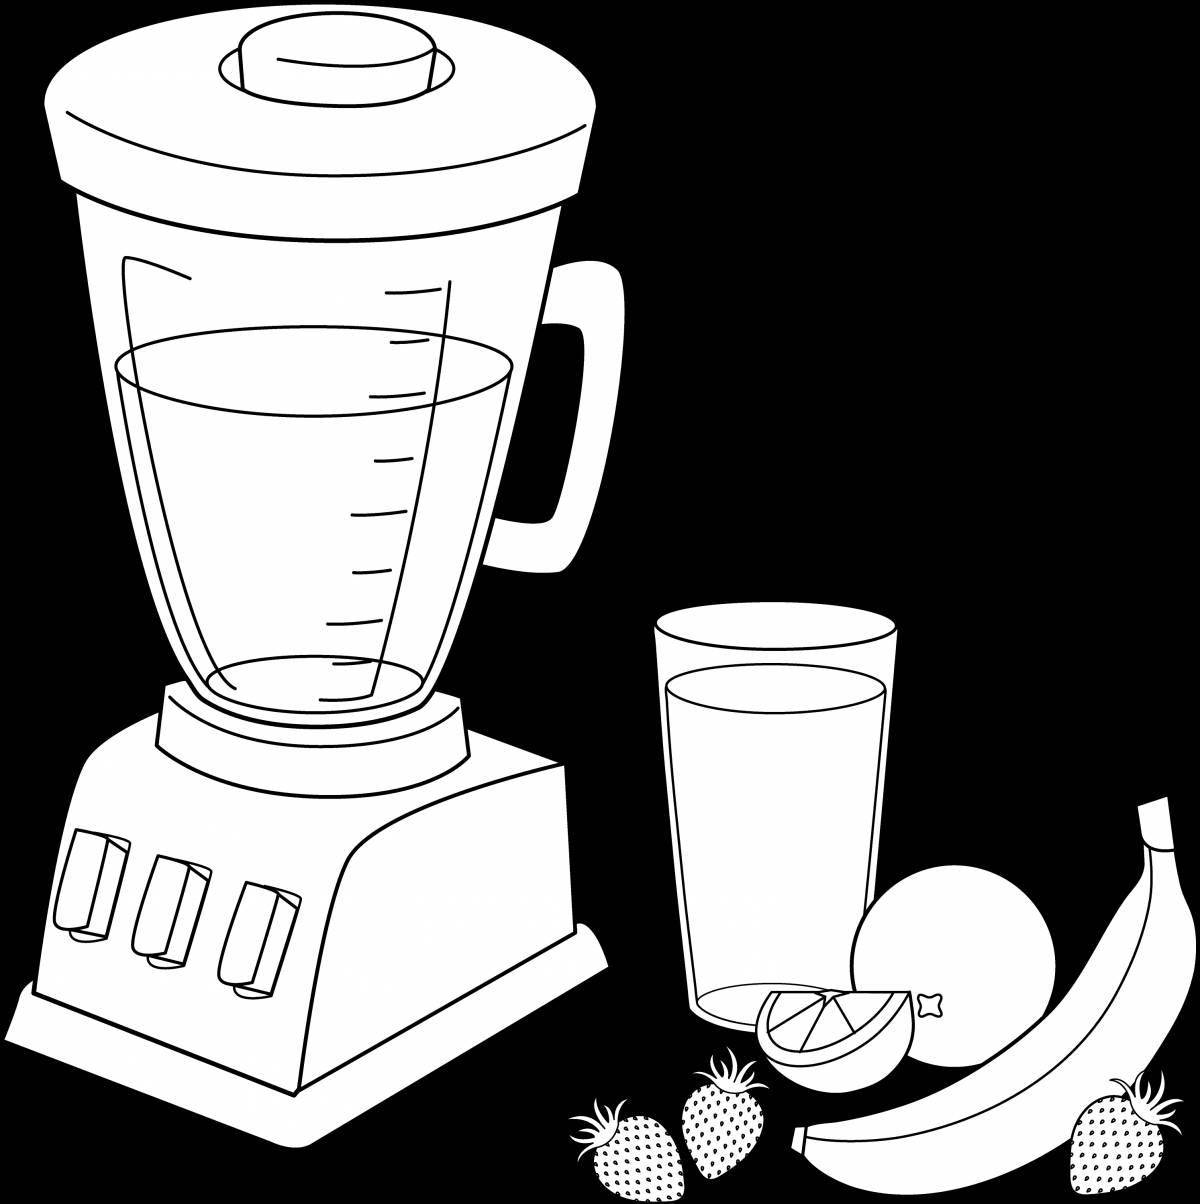 Refreshing household appliances coloring page